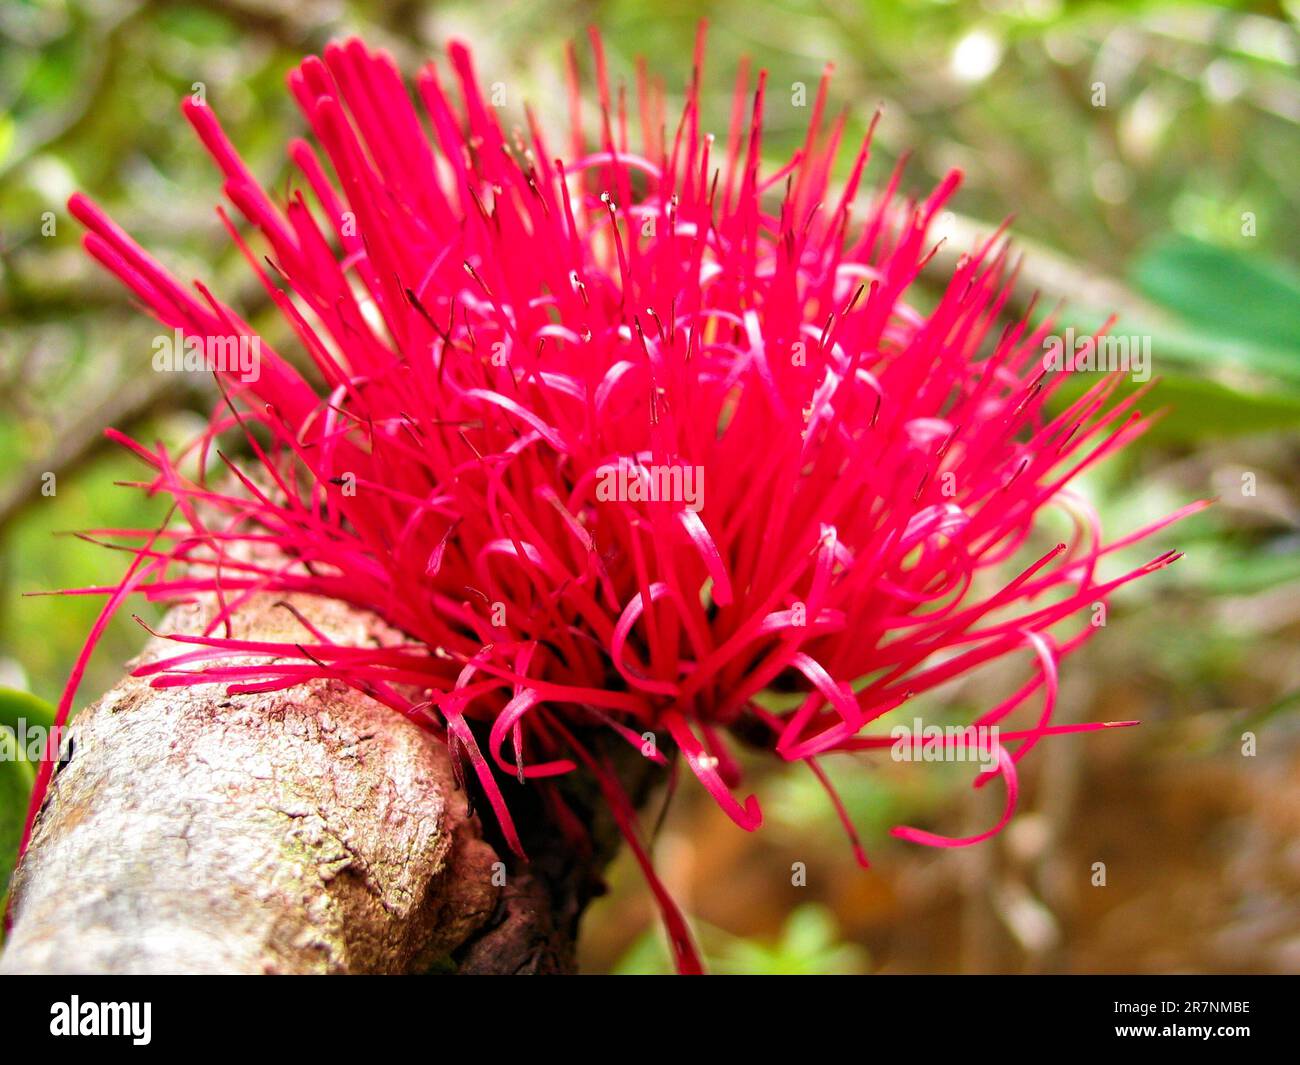 Red and pink flowers of a tropical parasite shrub / vine (Amyema scandens). Stock Photo